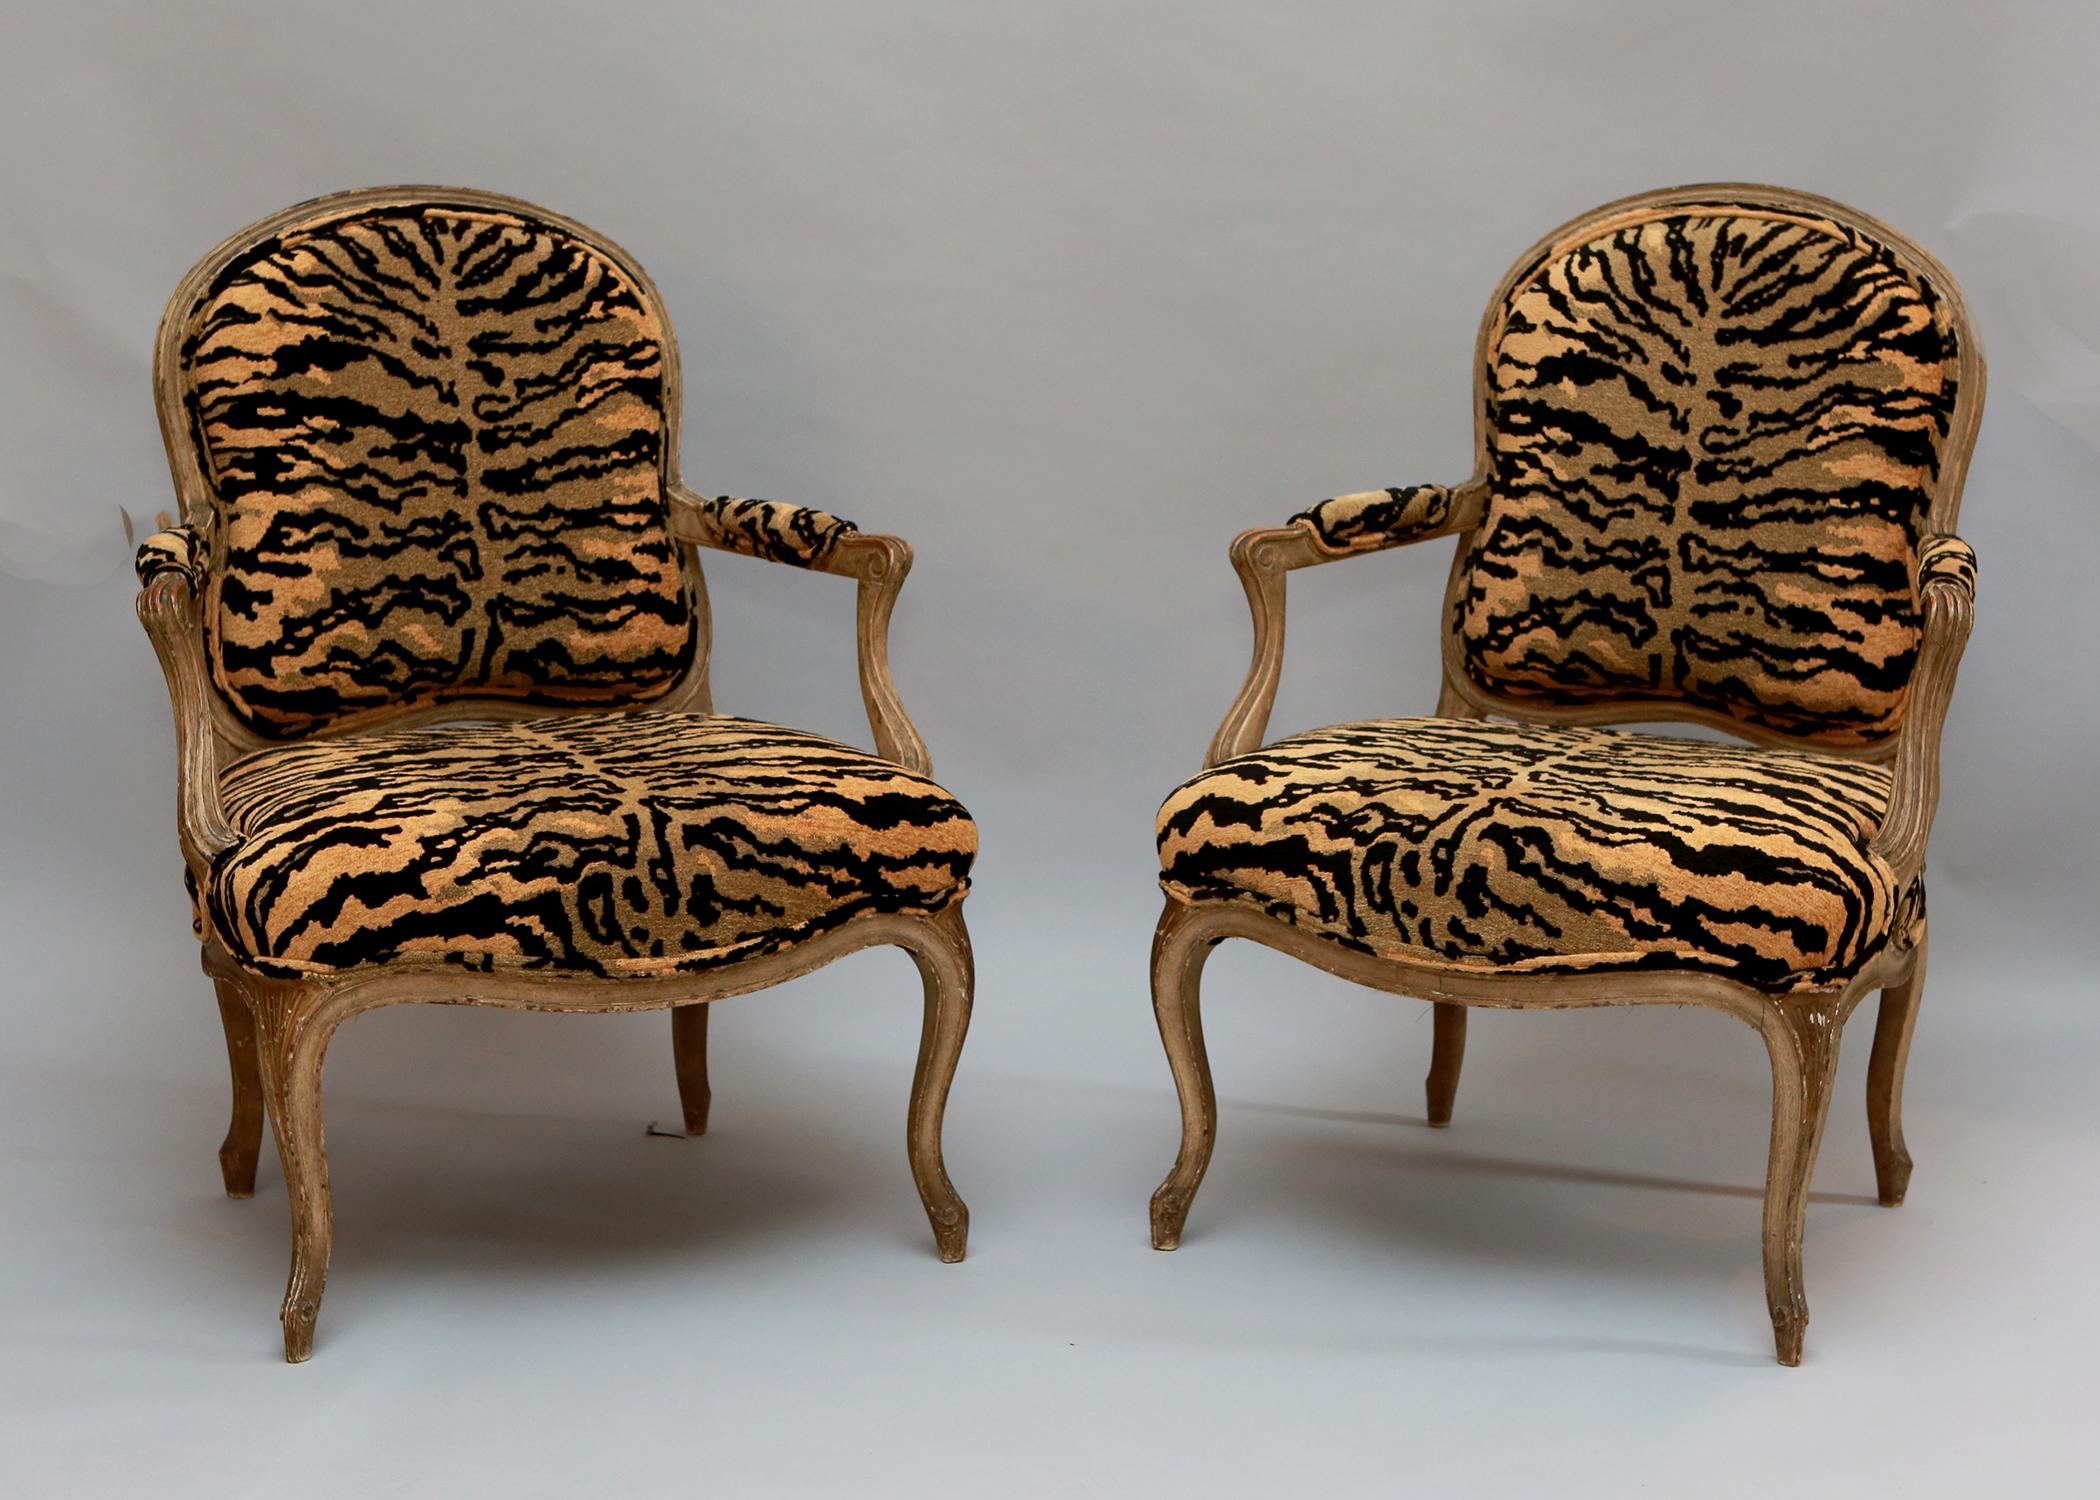 Pair of French carved armchairs with animal print upholstery, gracefully curved legs, and ample seat. Frames are natural wood. 40 1/2